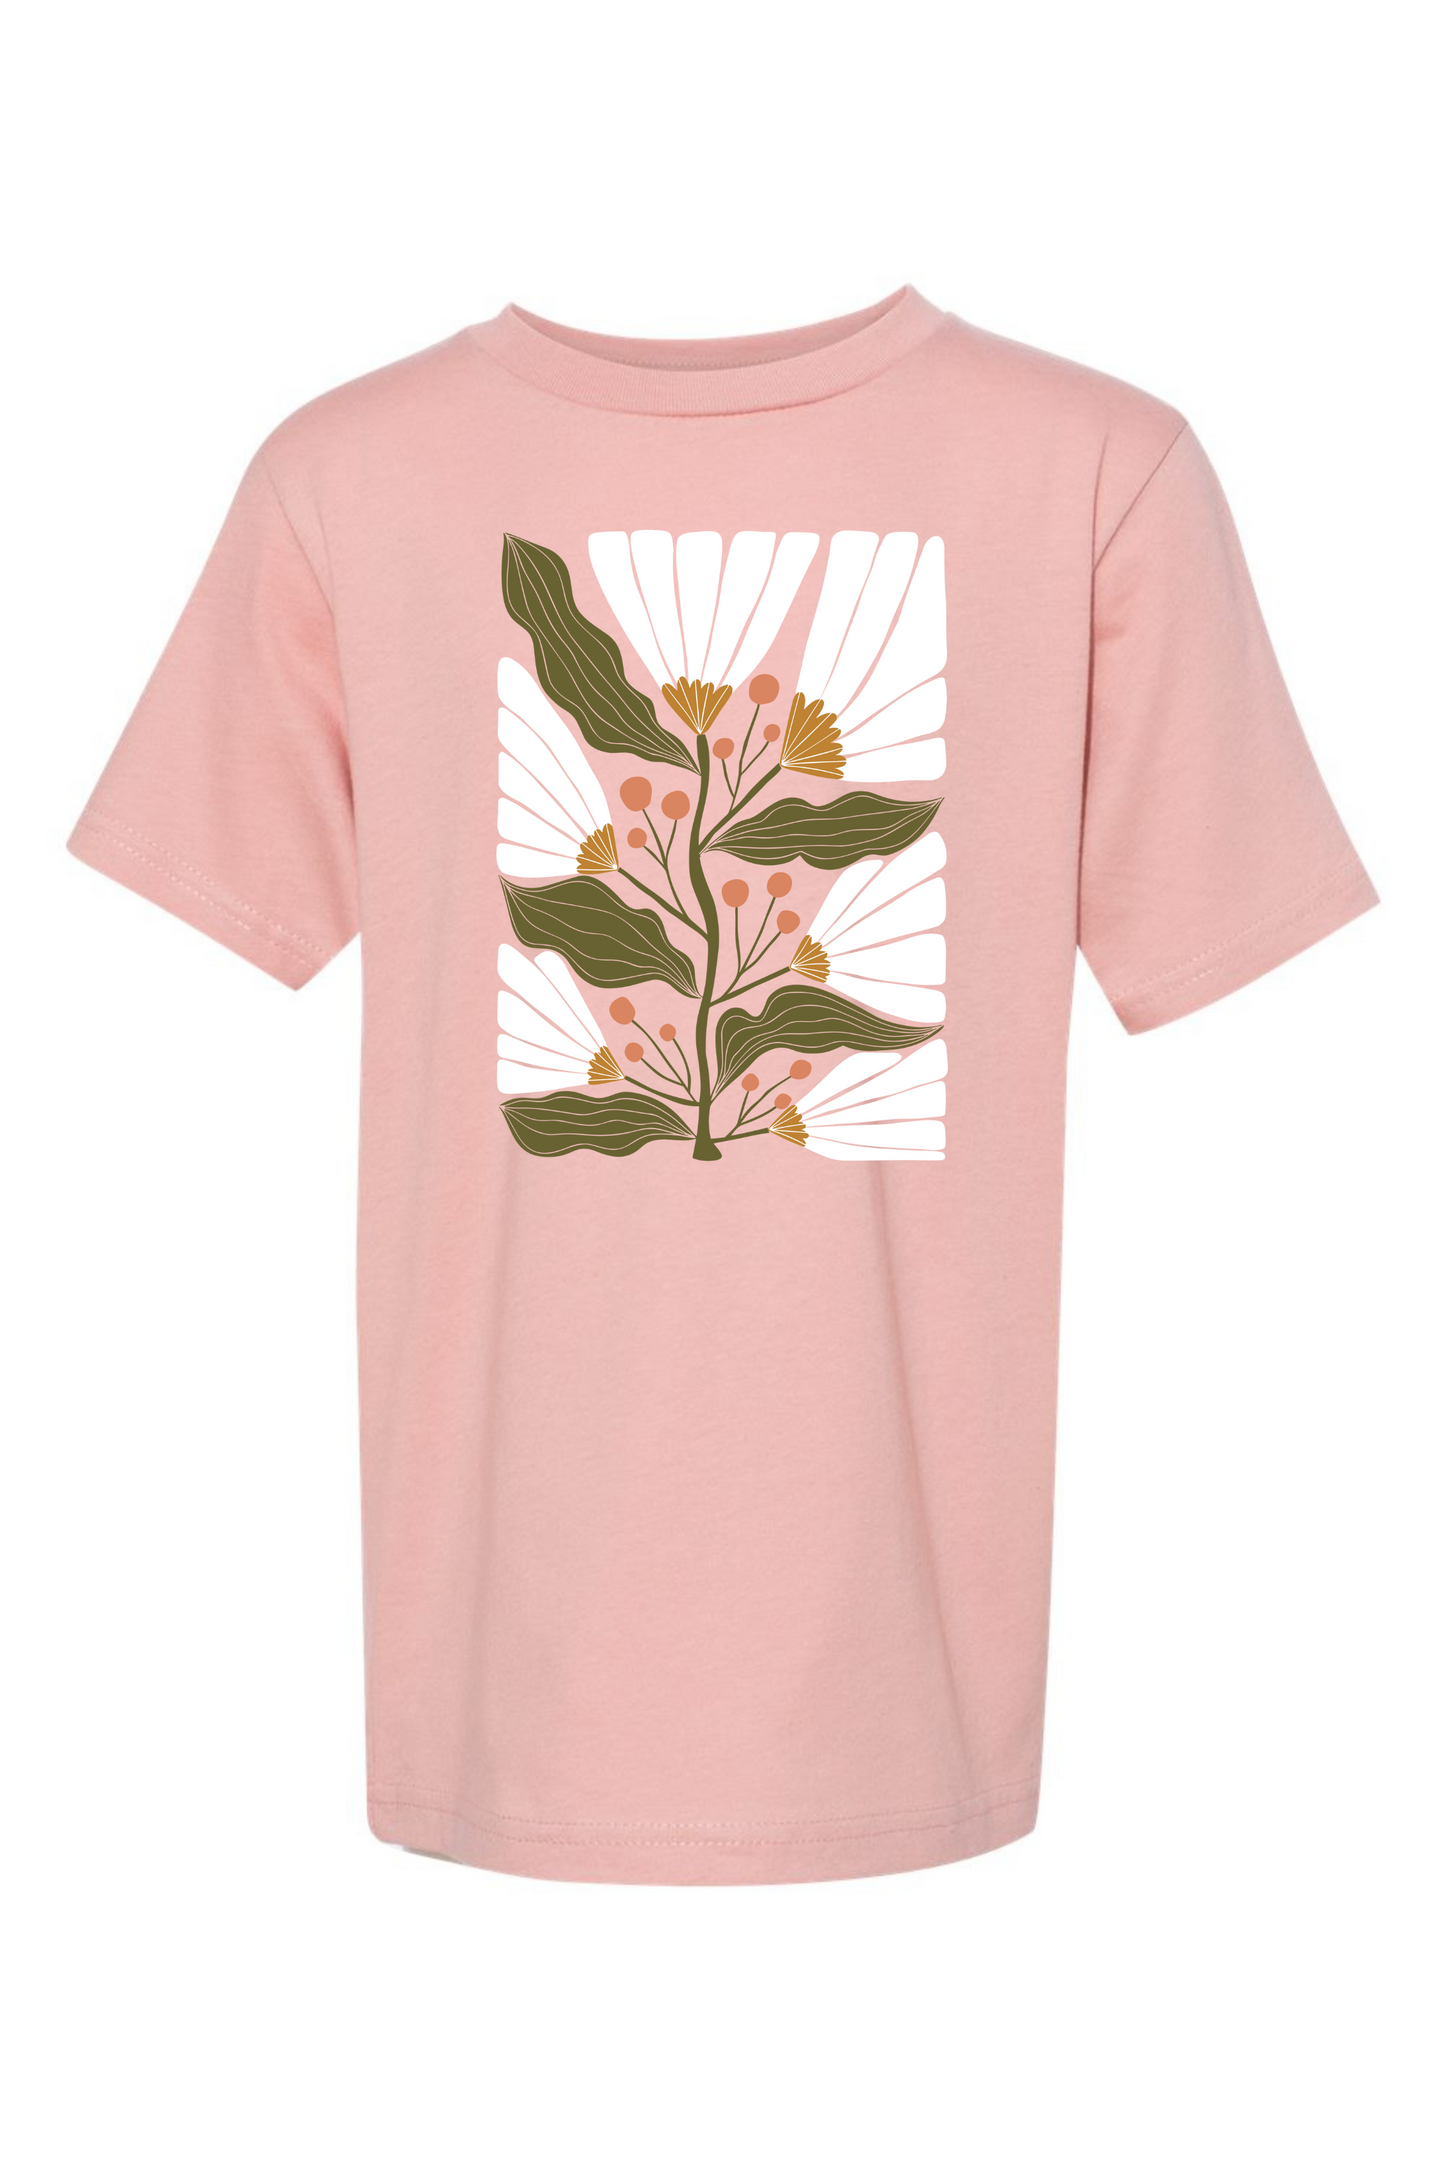 Essential Floral | Kids Tee-Kids Tees-Sister Shirts-Sister Shirts, Cute & Custom Tees for Mama & Littles in Trussville, Alabama.